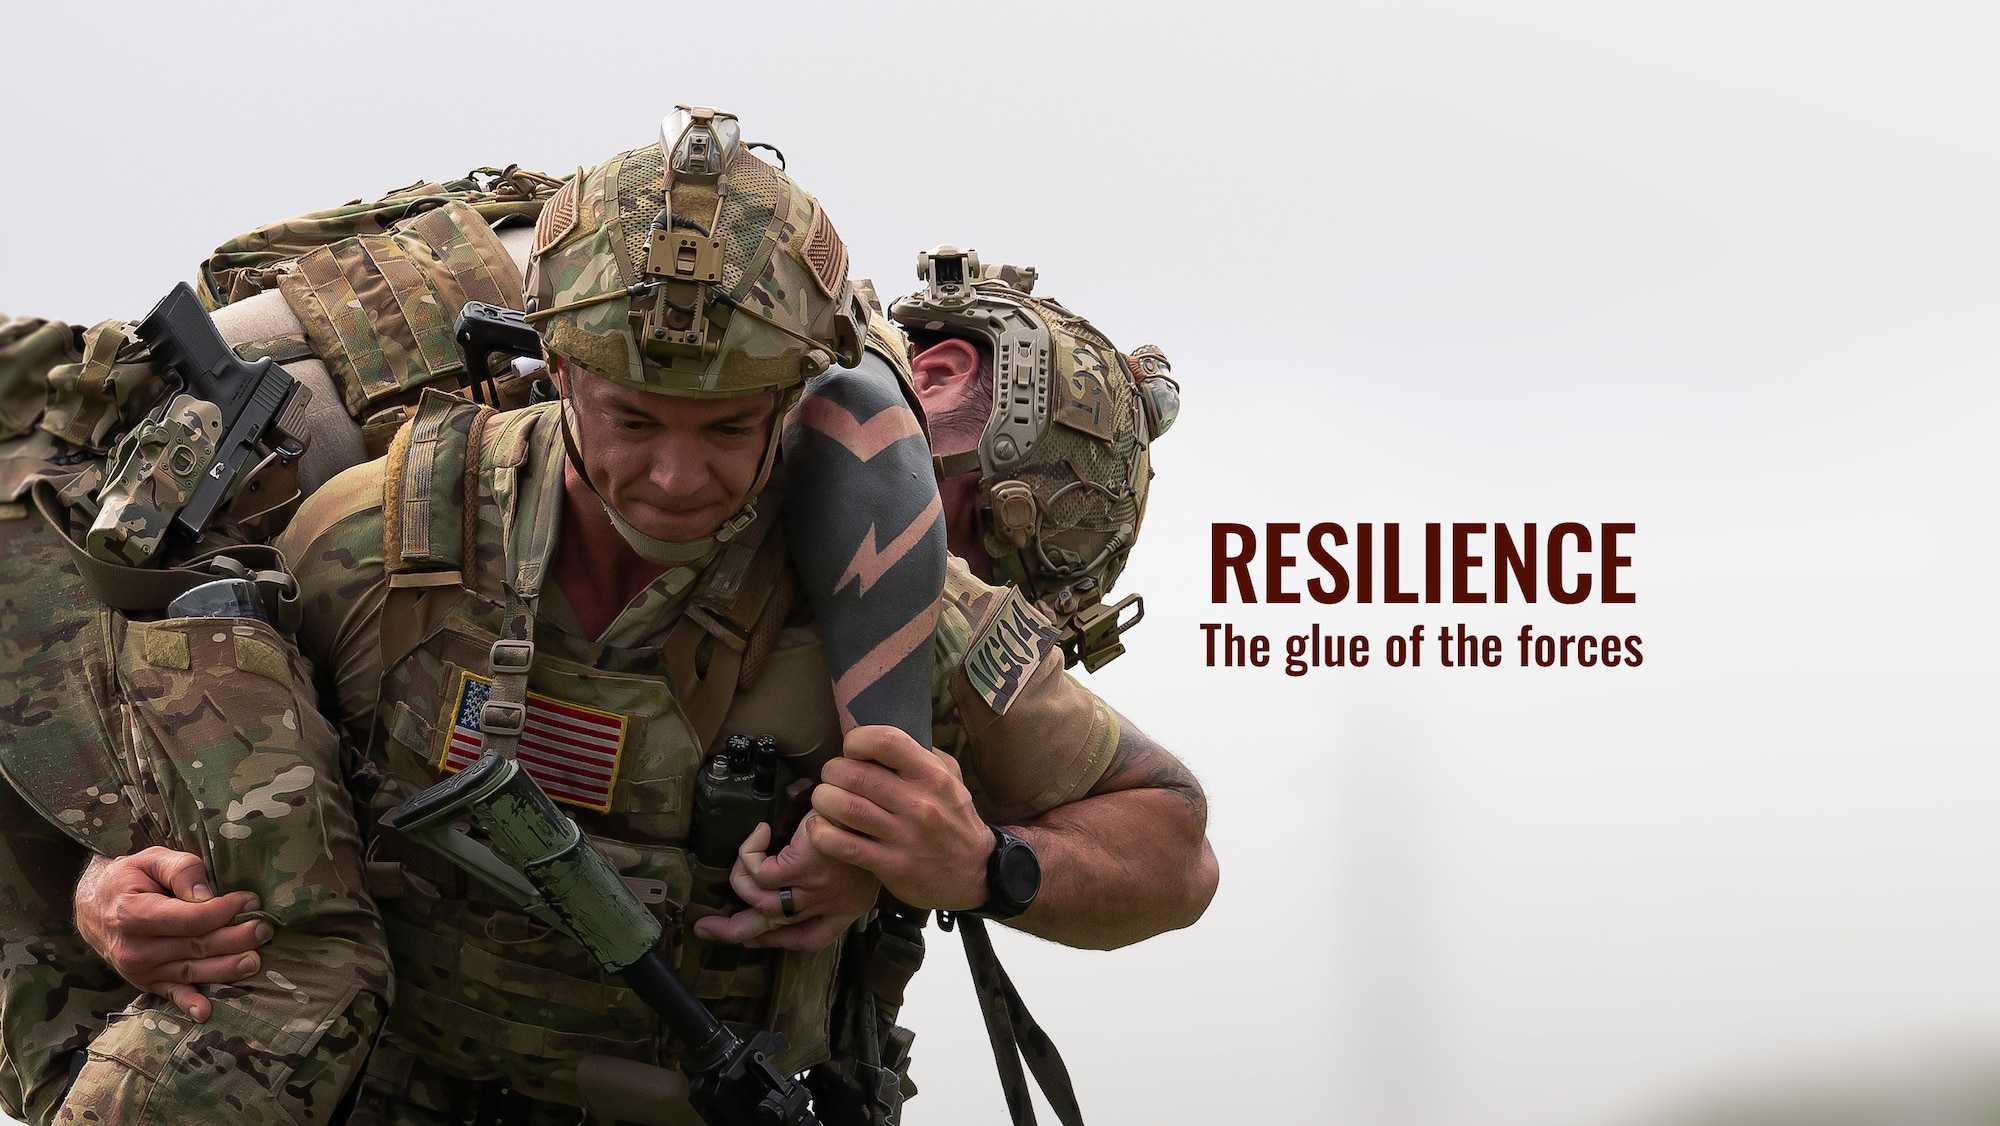 Resilience: The glue of the forces